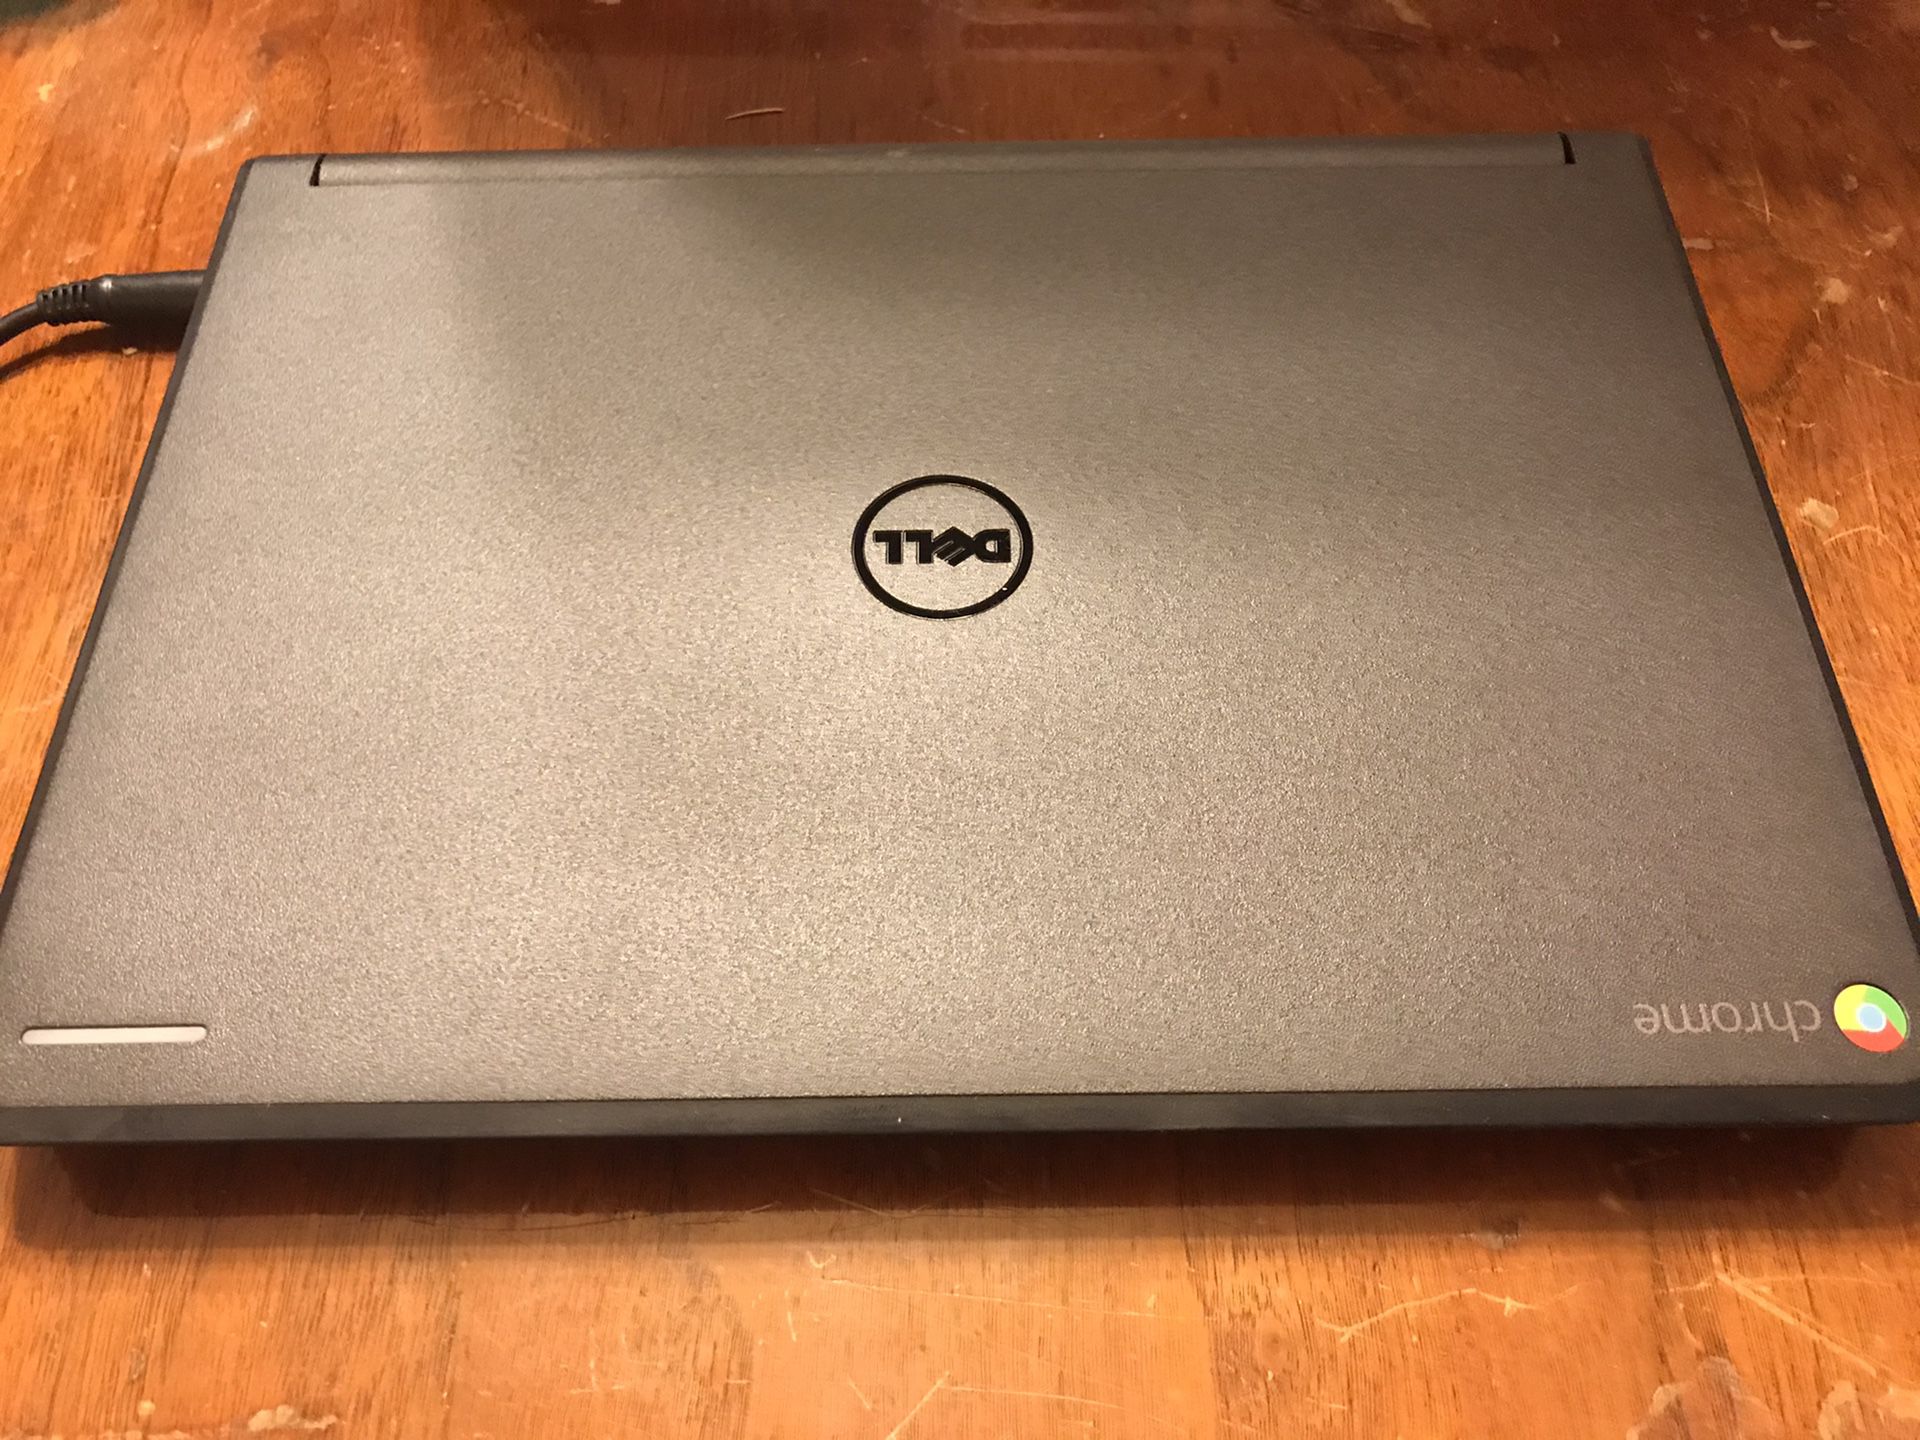 Dell chromebook 11 with school locked. Can use for online research and watch movies, play app games. With power adapter. Two for $60 ( have two mode